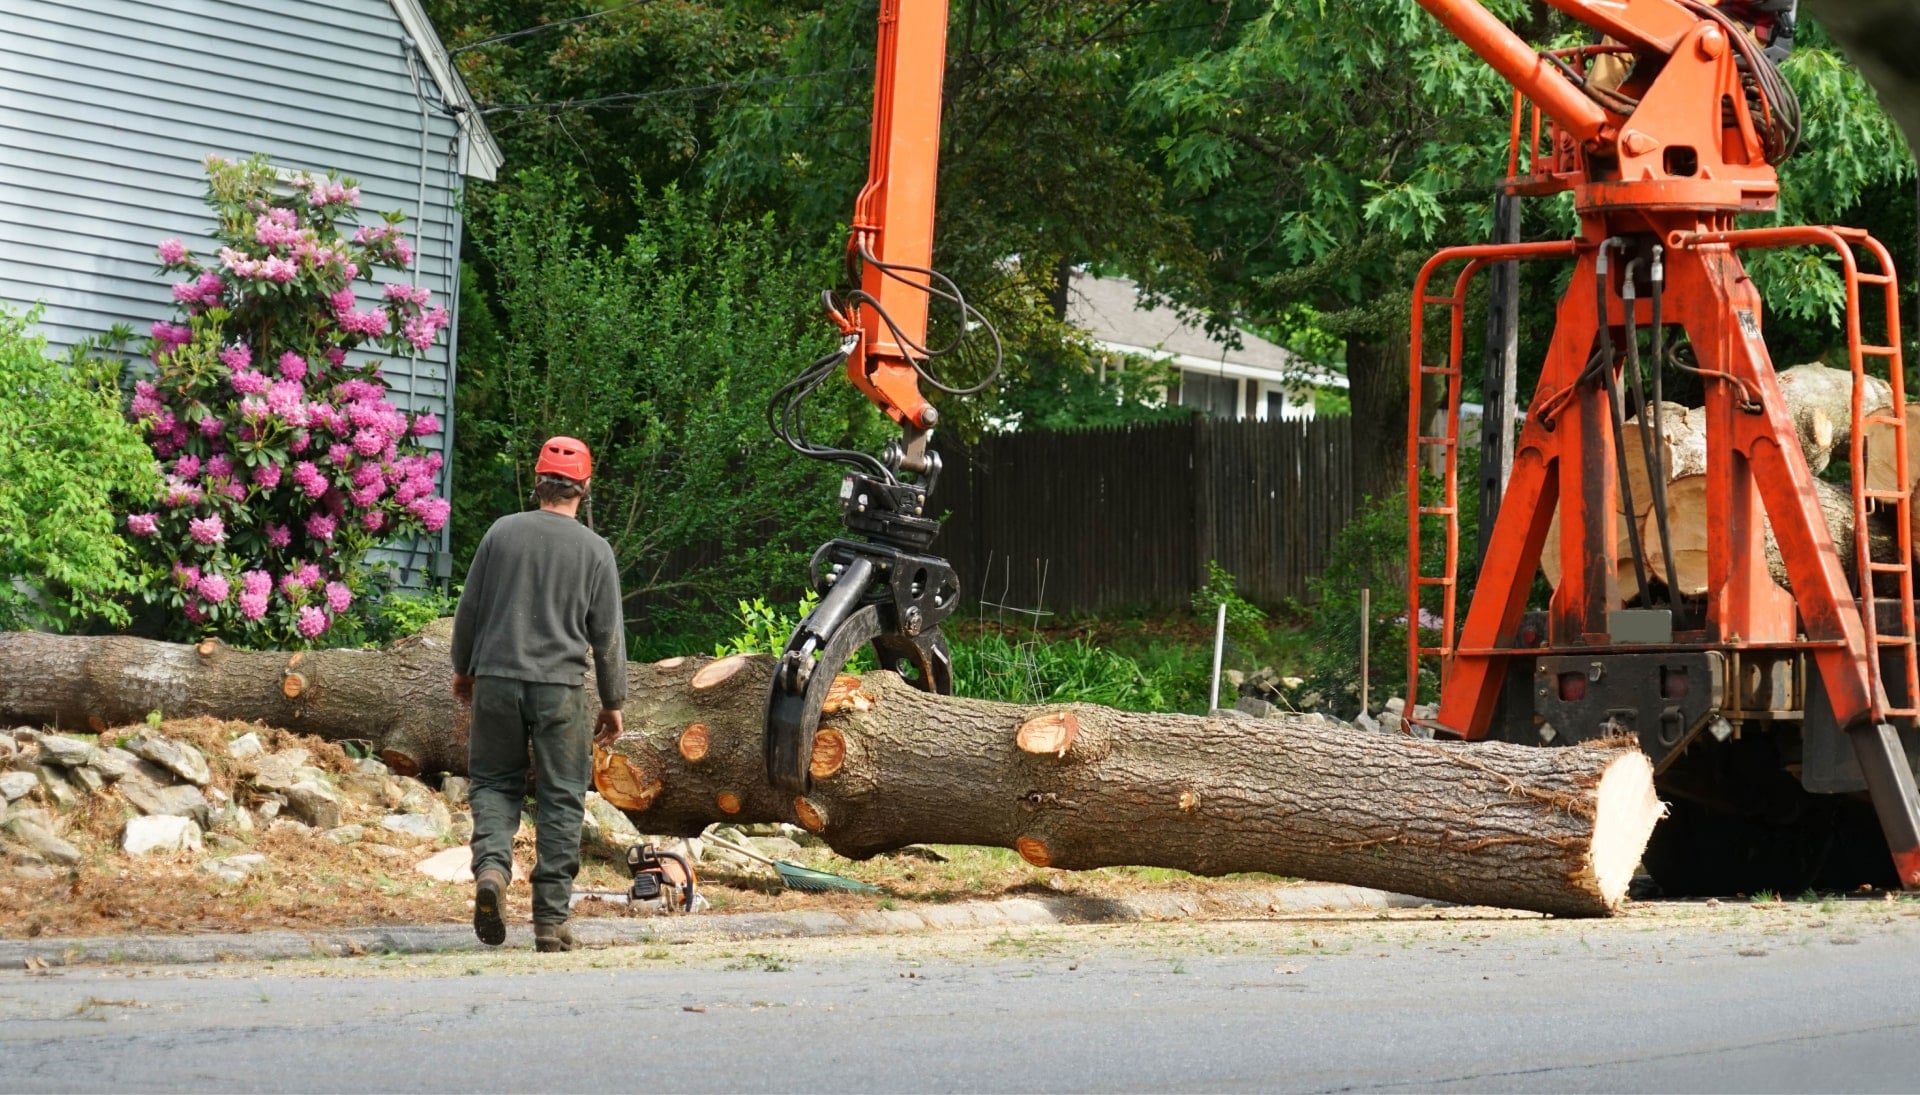 Local partner for Tree removal services in Memphis